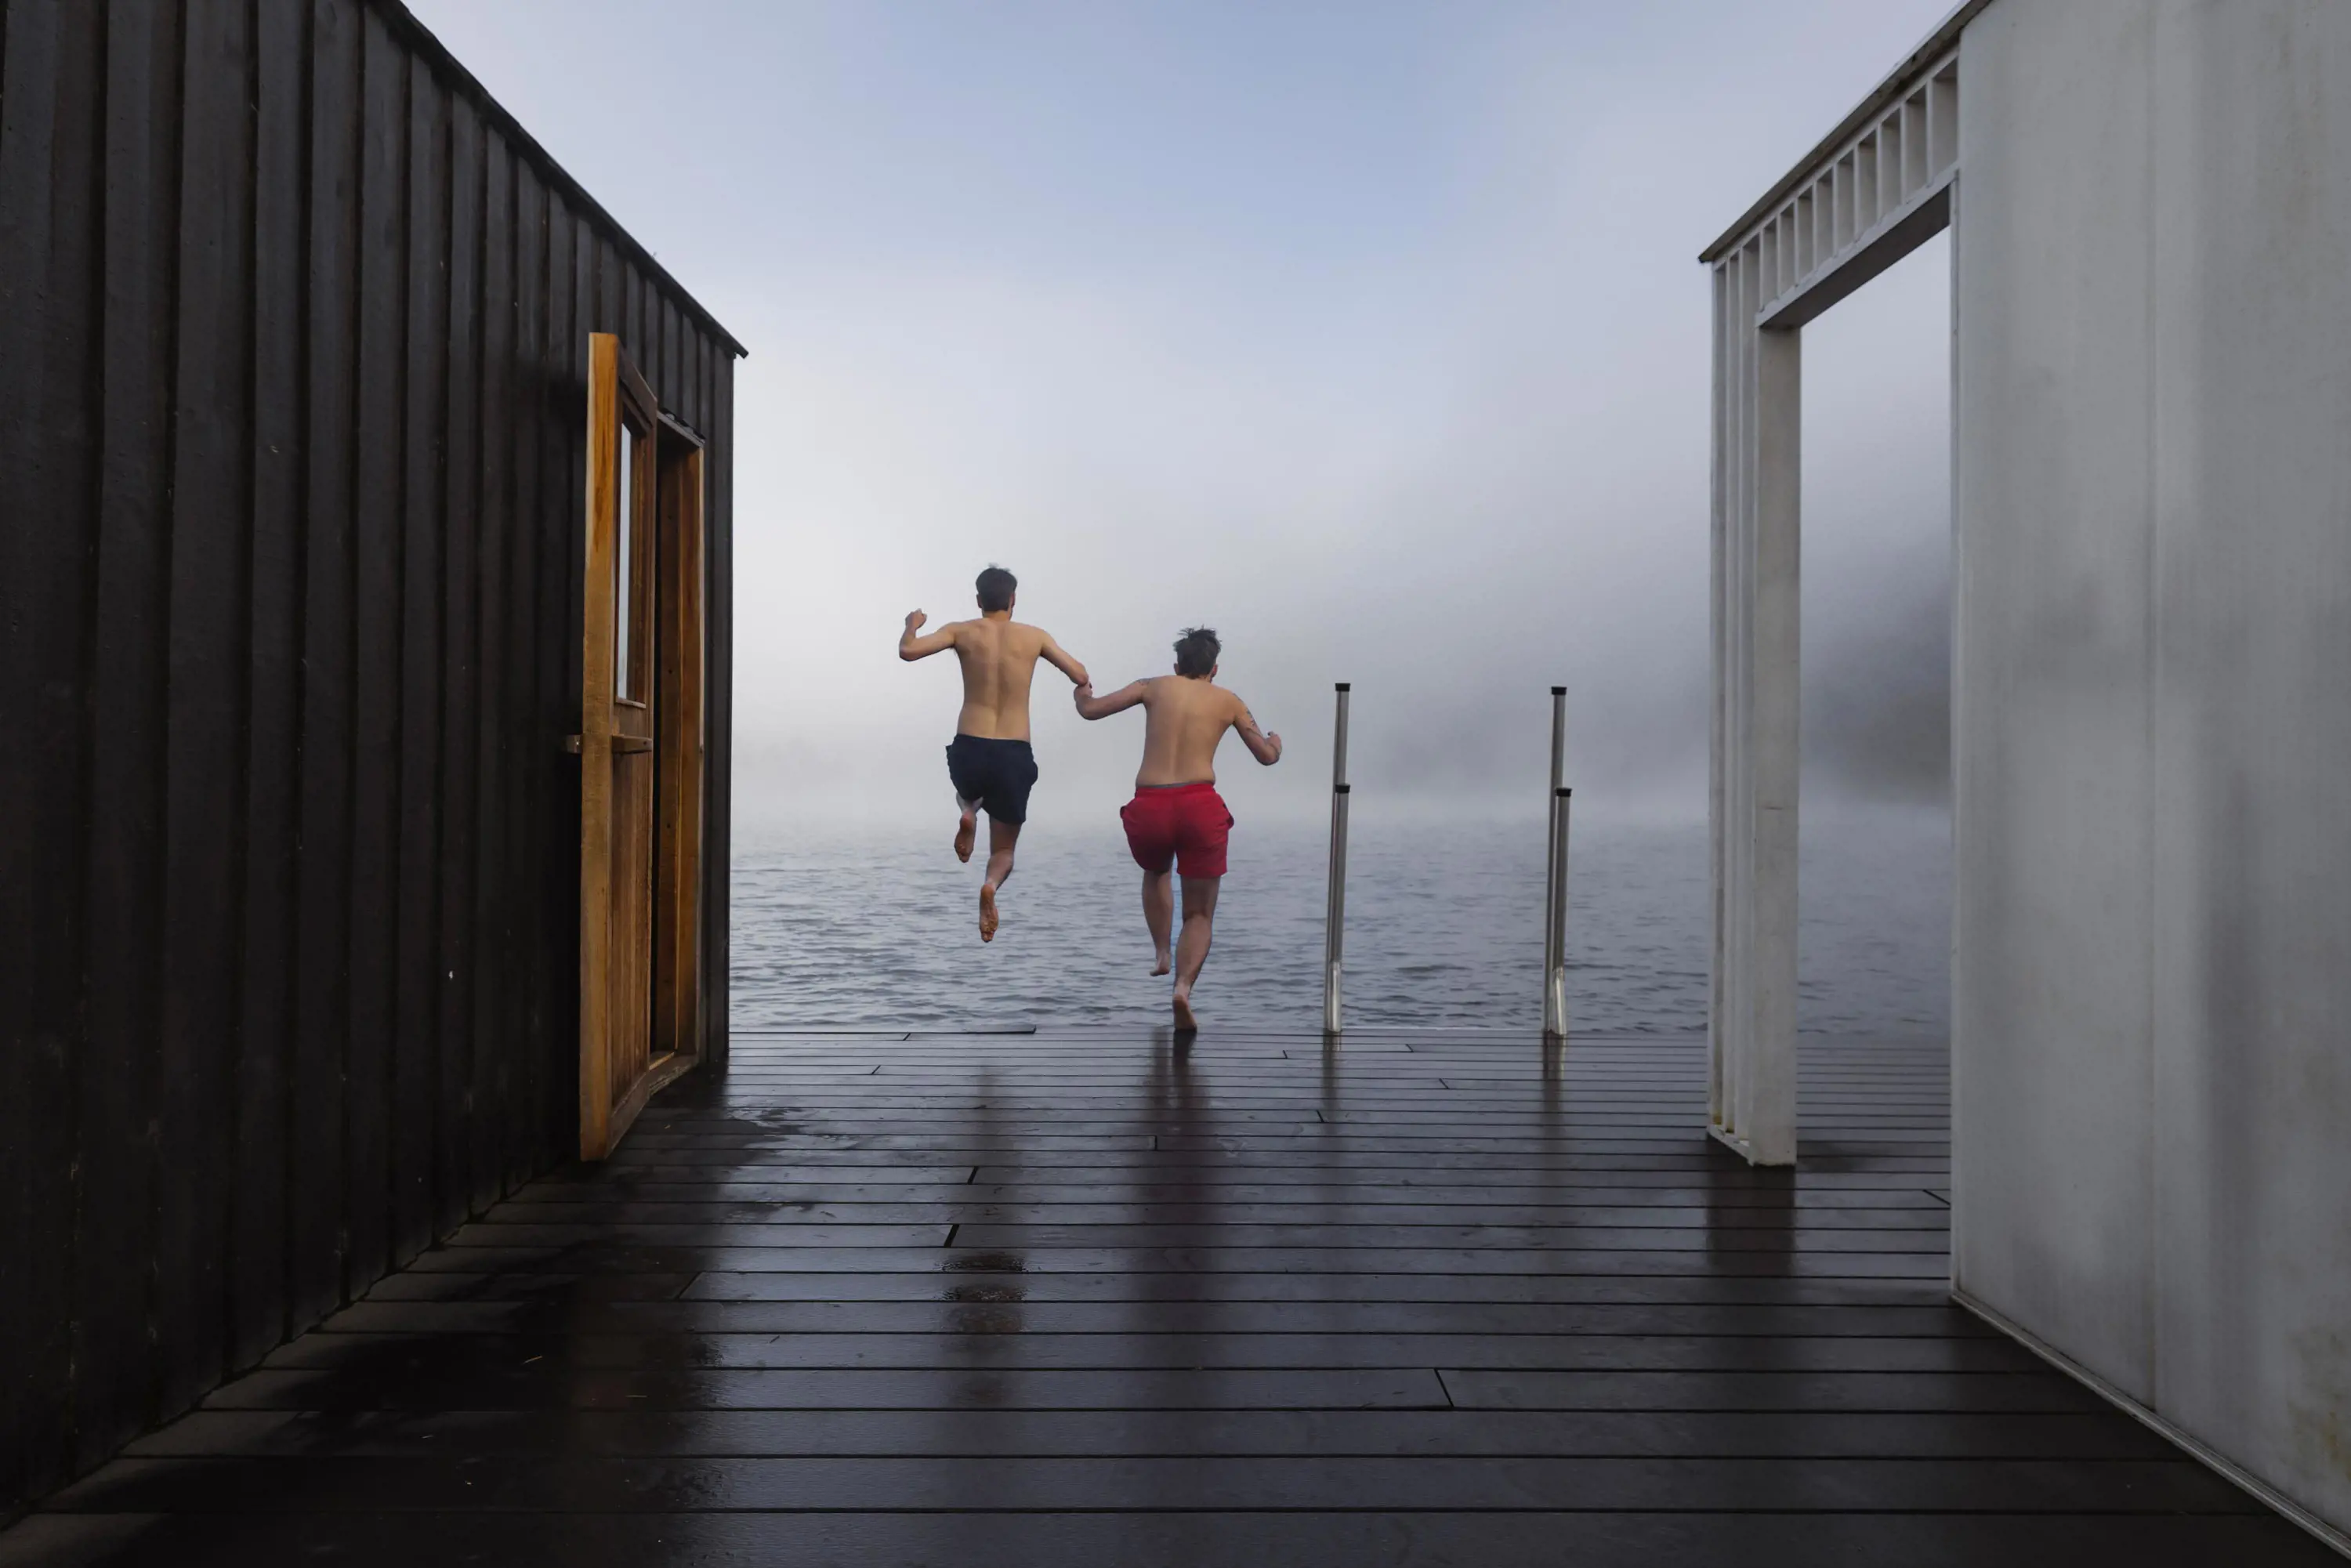 To young men holding hands jump into the cold waters of a lake from the decking in front of a sauna.